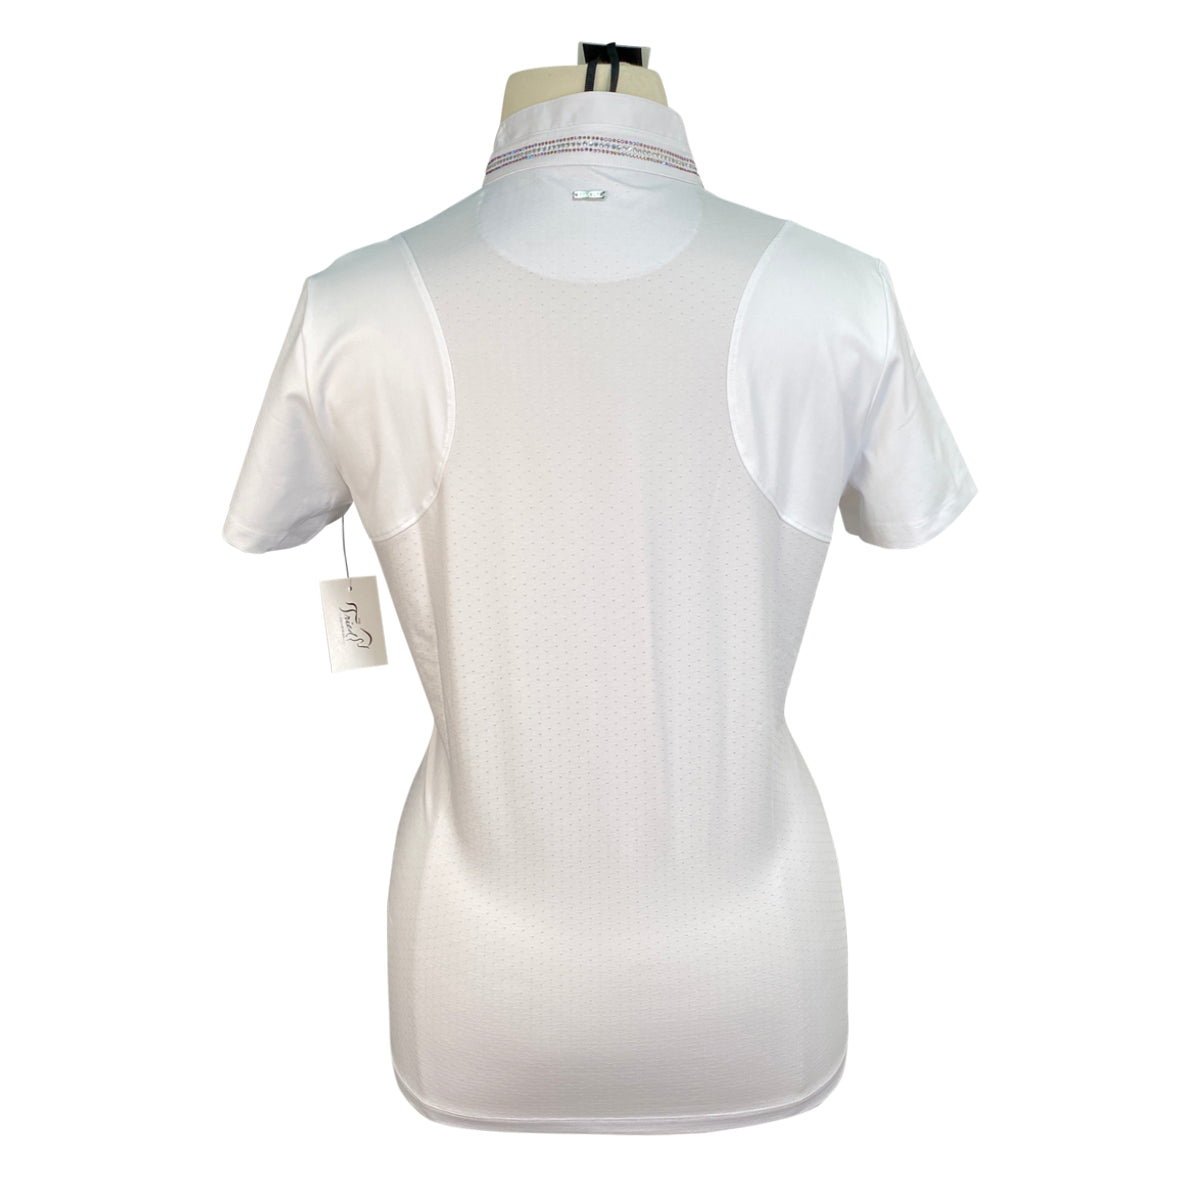 Pikeur 'Phiola' Competition Shirt in WhitePikeur 'Phiola' Competition Shirt in White